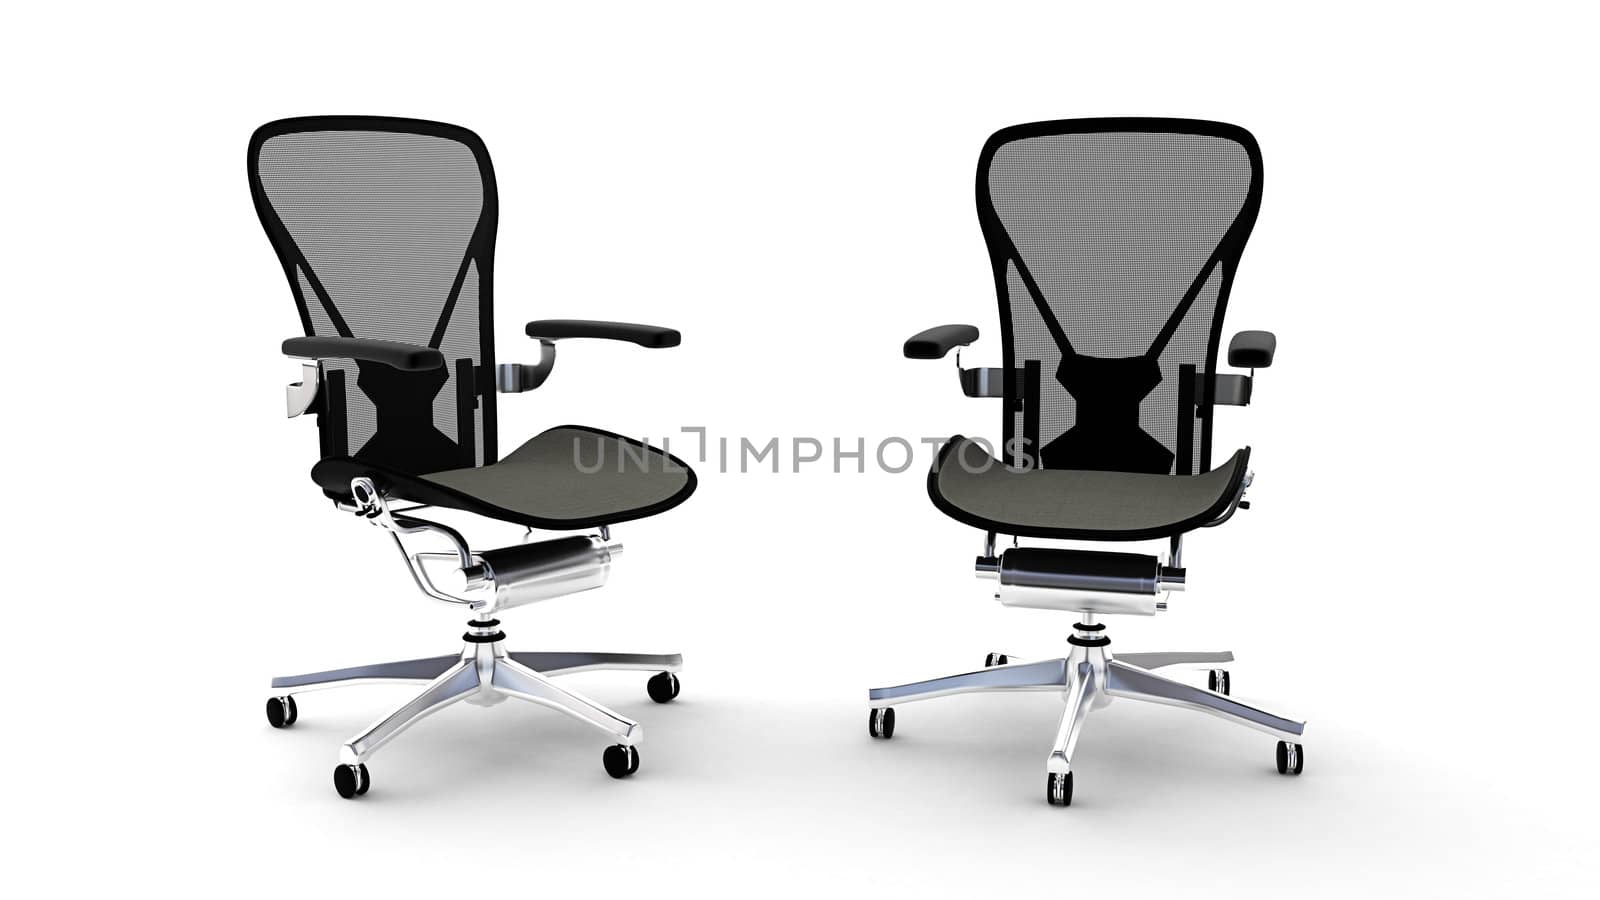 pair of office chairs on a white background 3d render